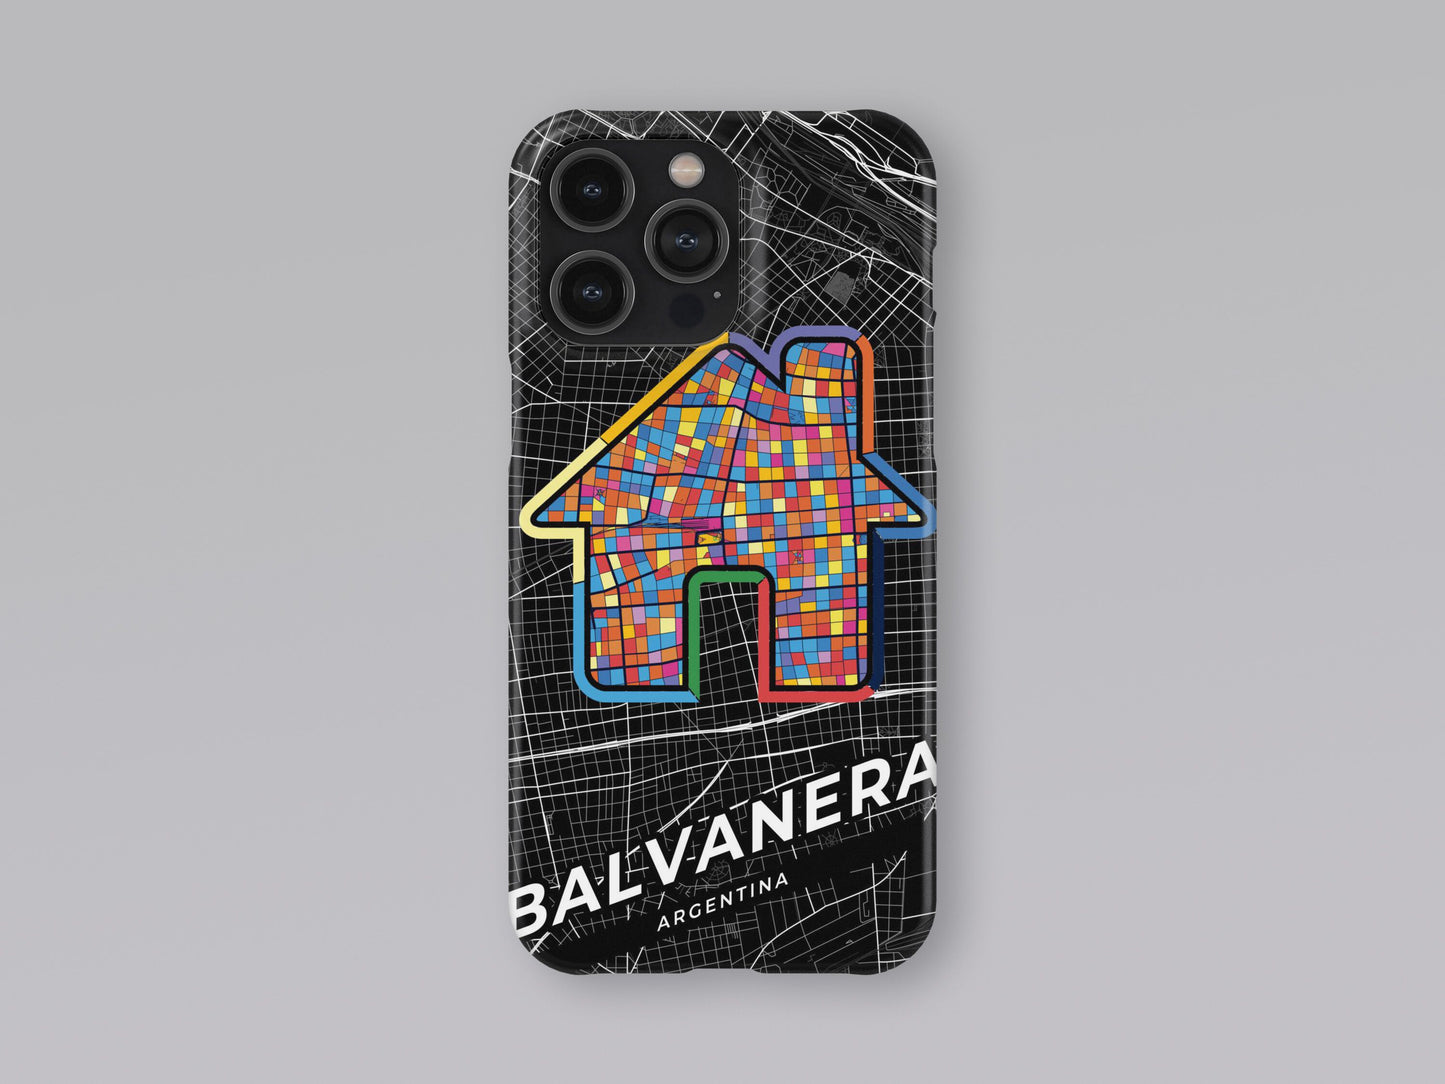 Balvanera Argentina slim phone case with colorful icon. Birthday, wedding or housewarming gift. Couple match cases. 3